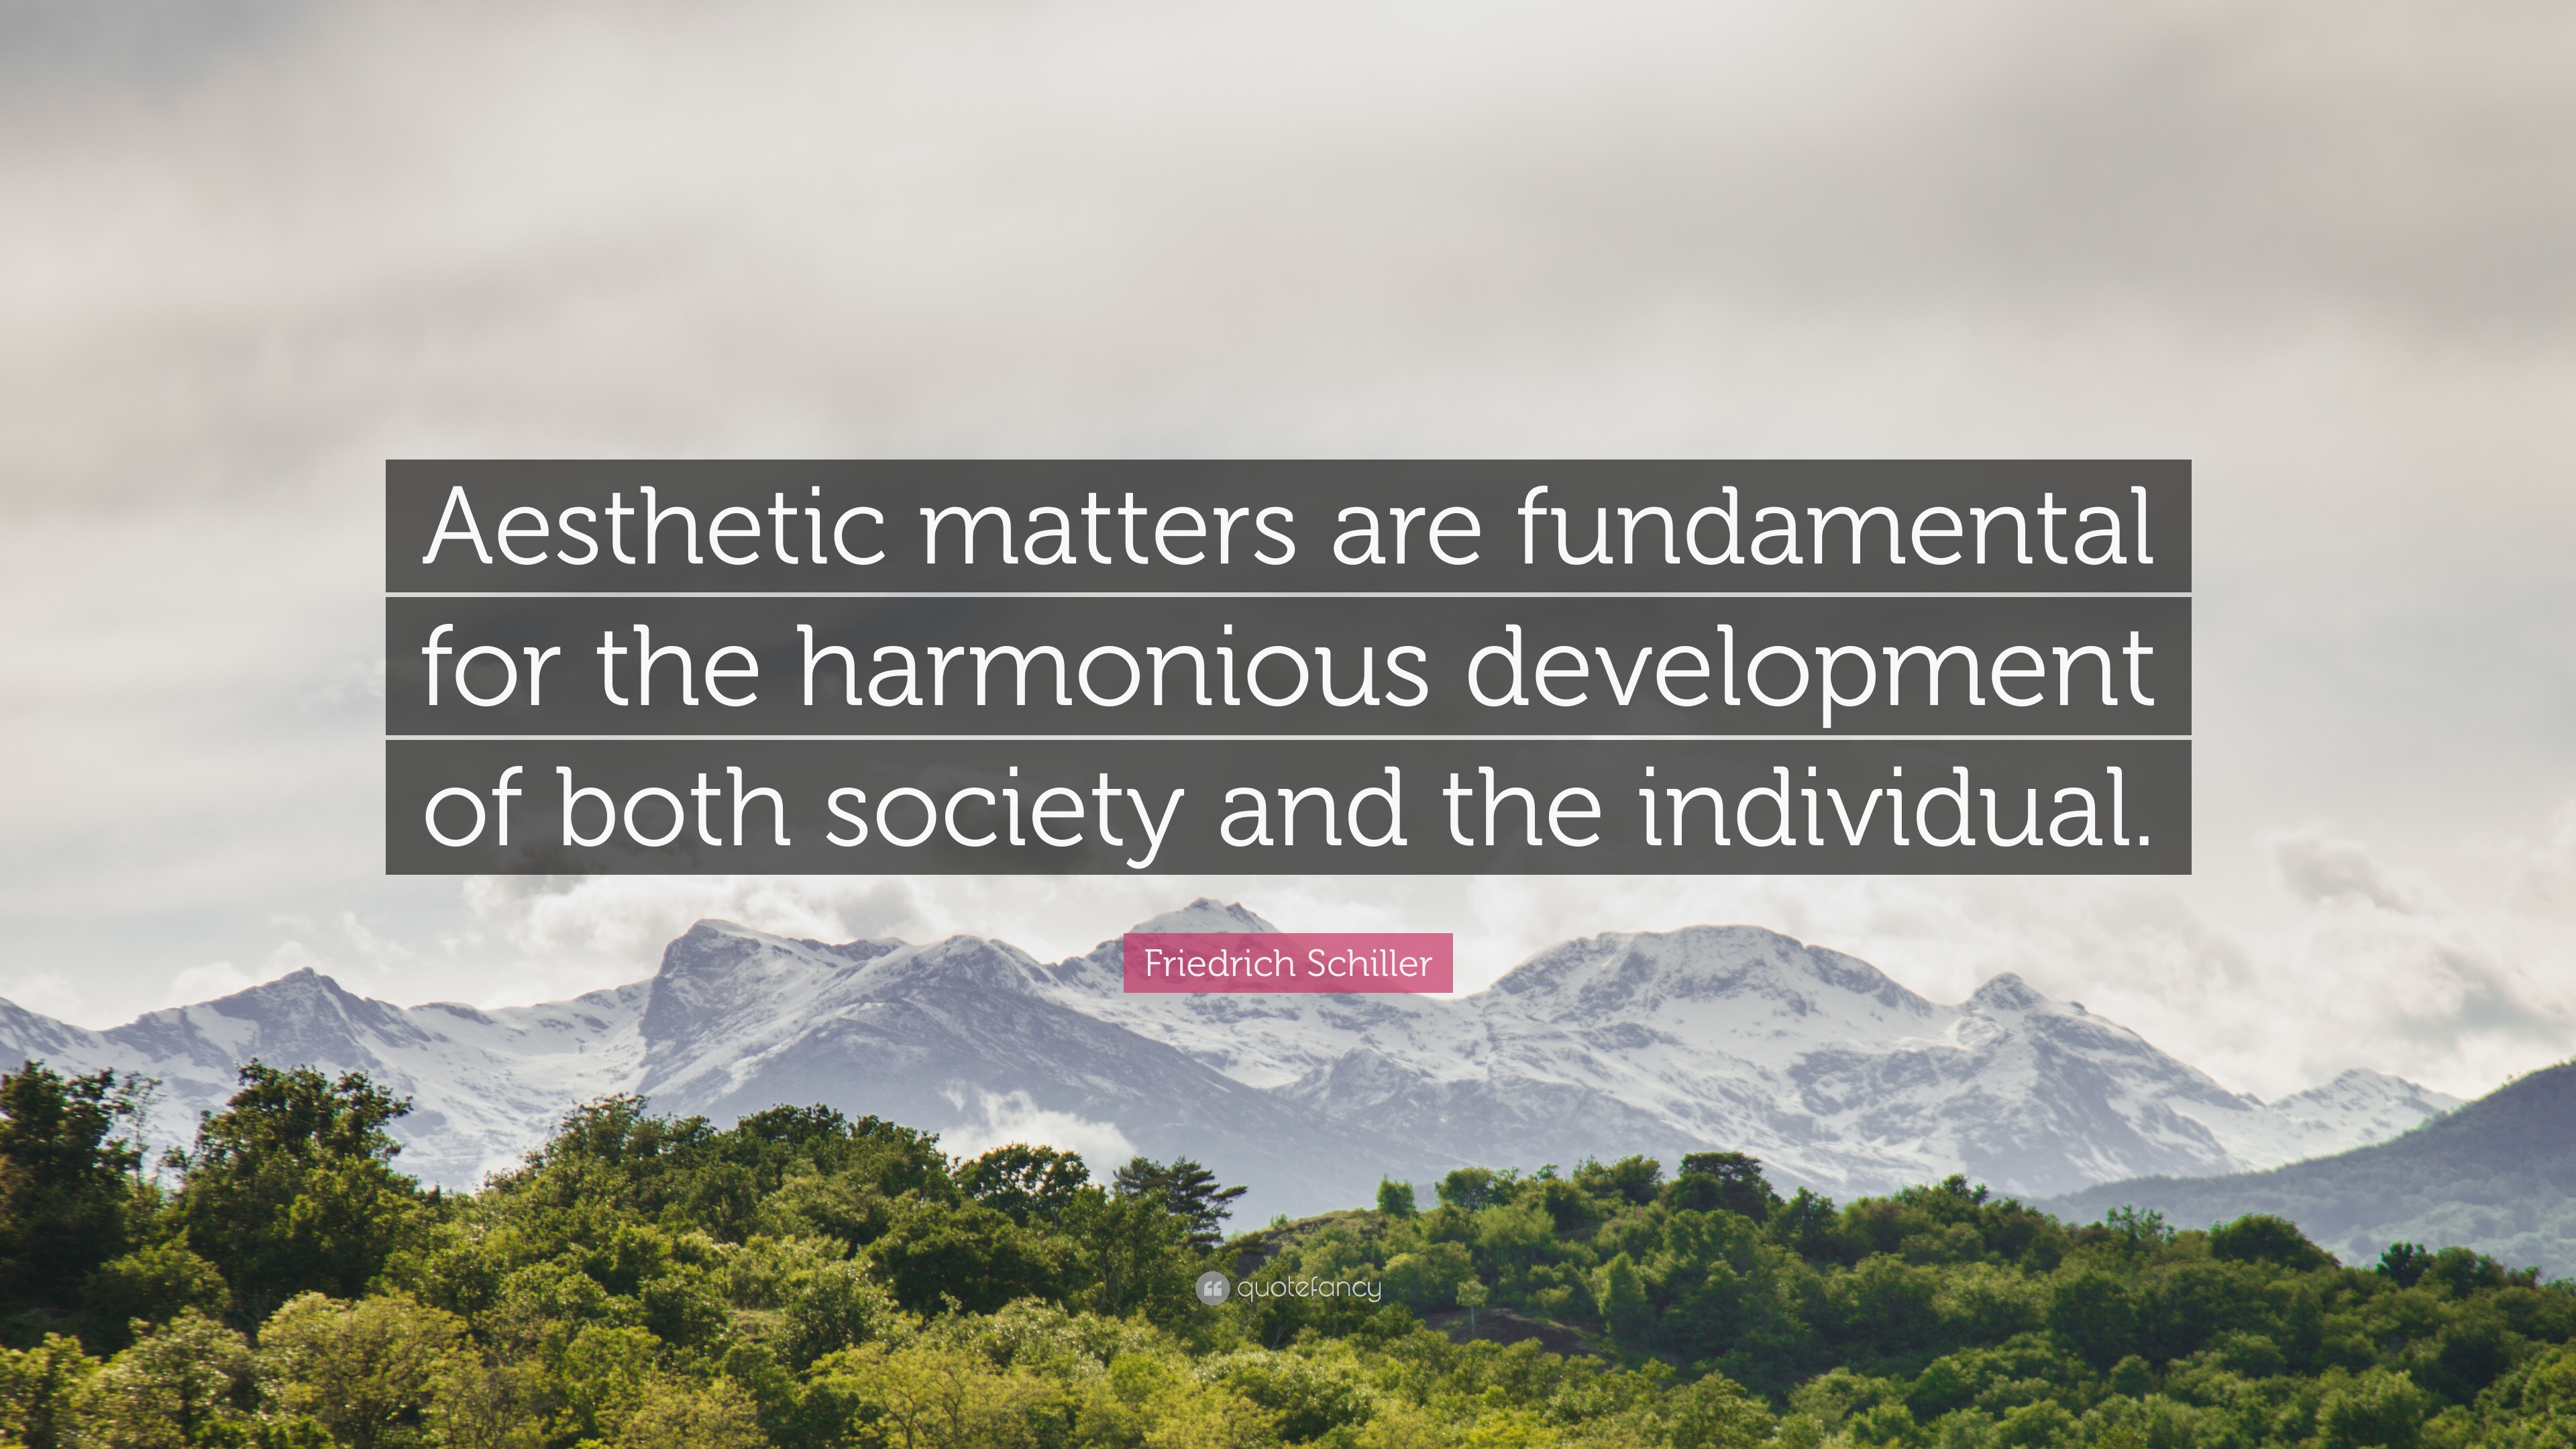 Friedrich Schiller Quote: “Aesthetic matters are fundamental